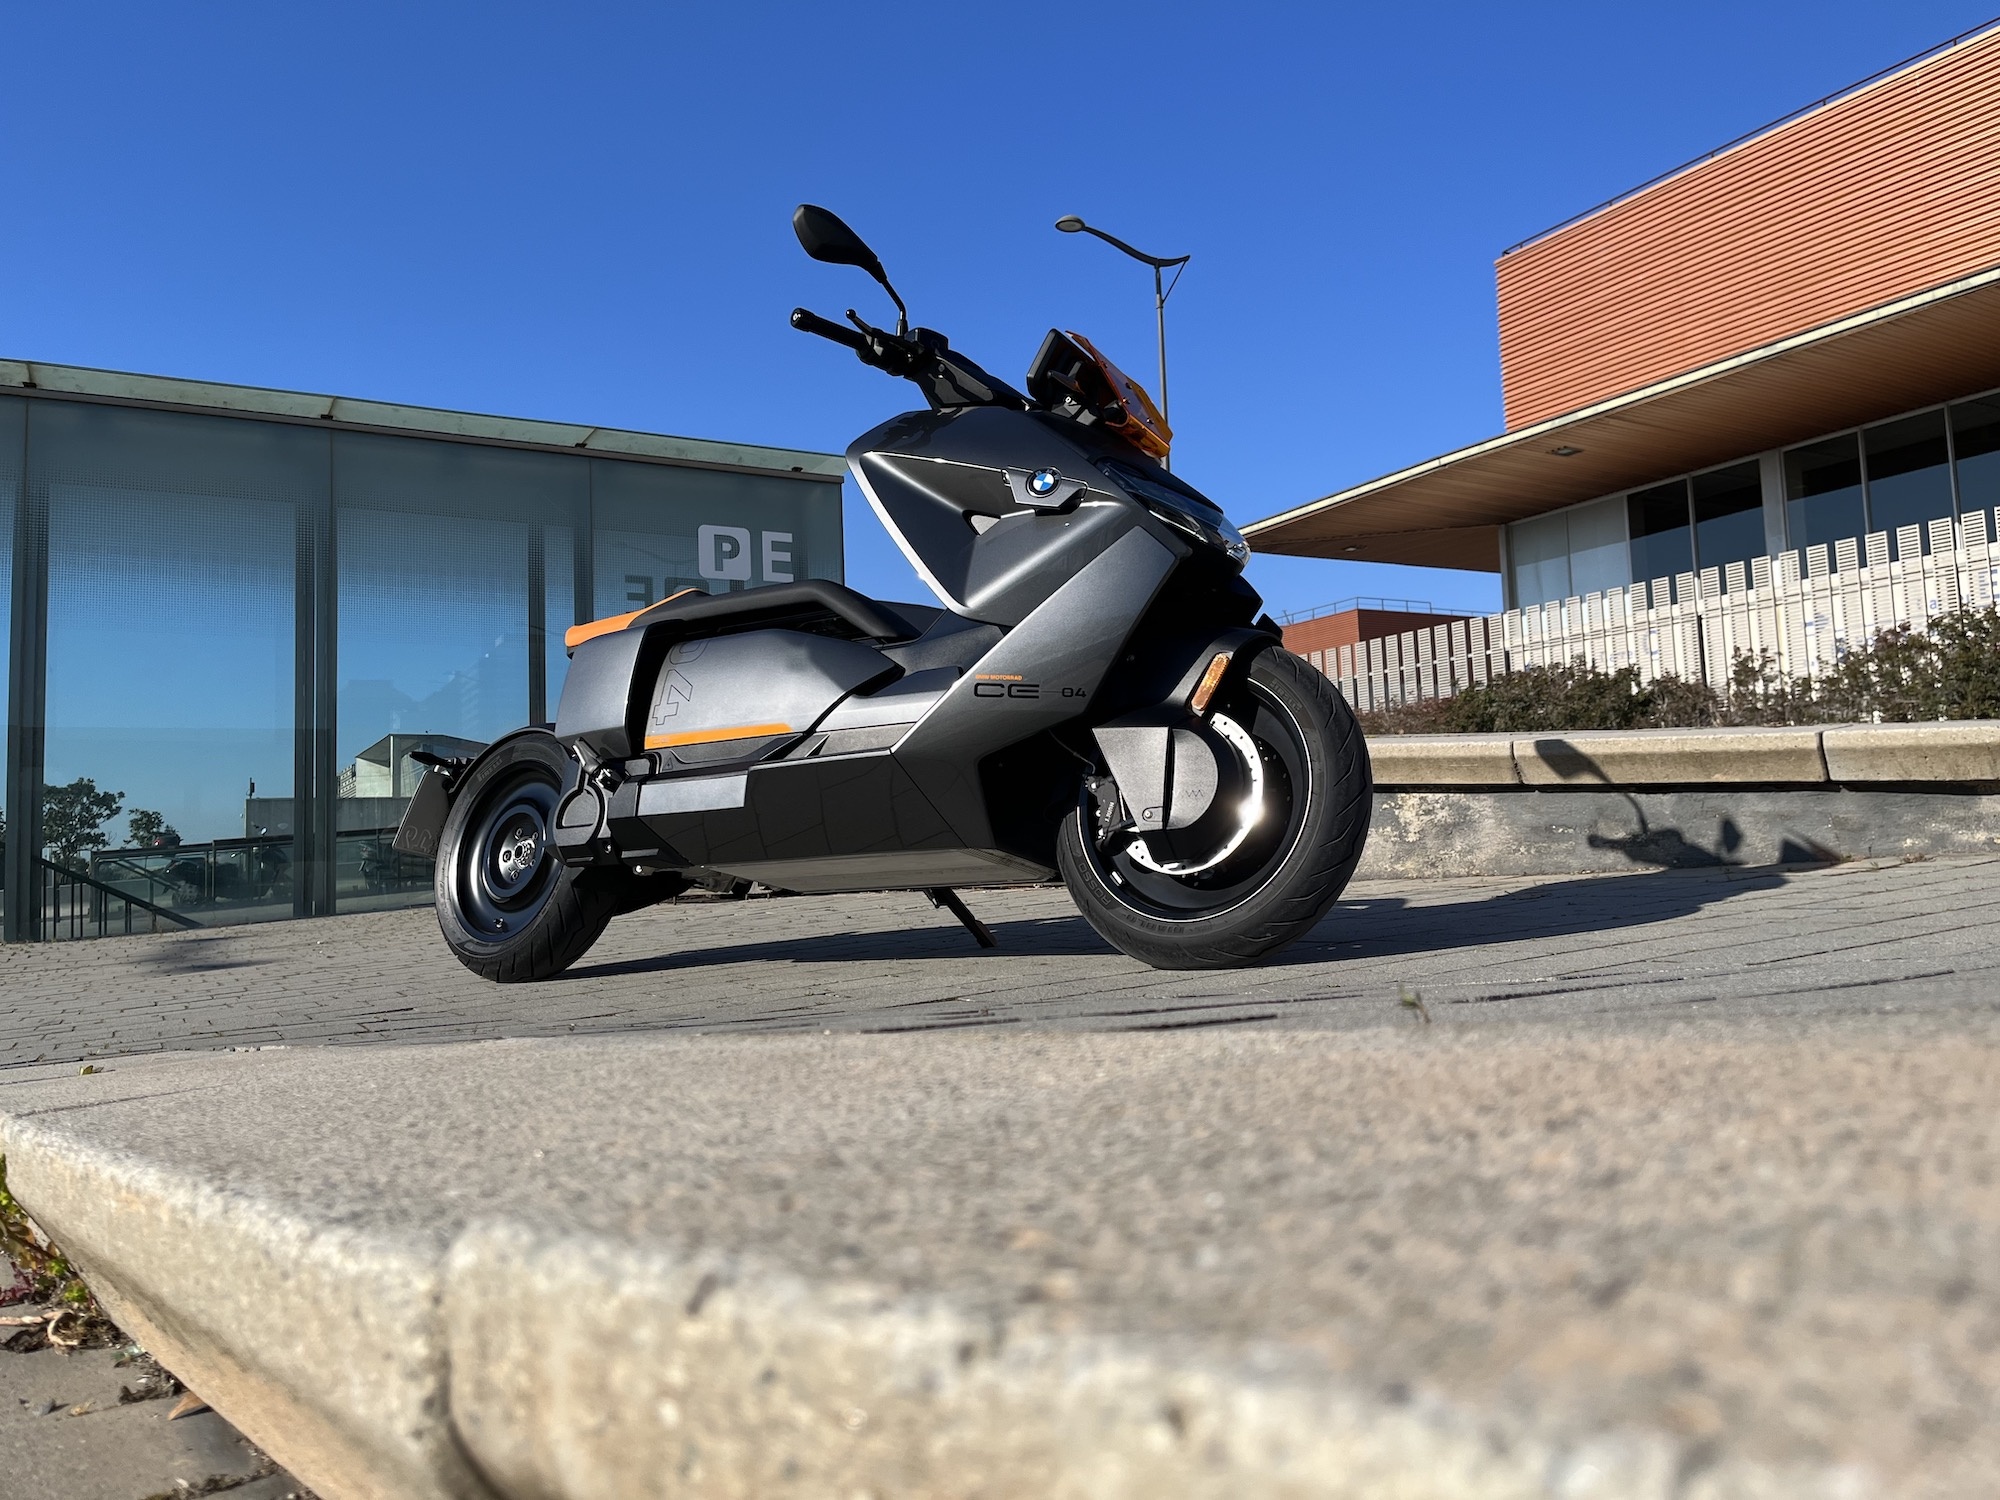 BMW CE 04, Electric scooter review, Frandroid, Complete assessment, 2000x1500 HD Desktop